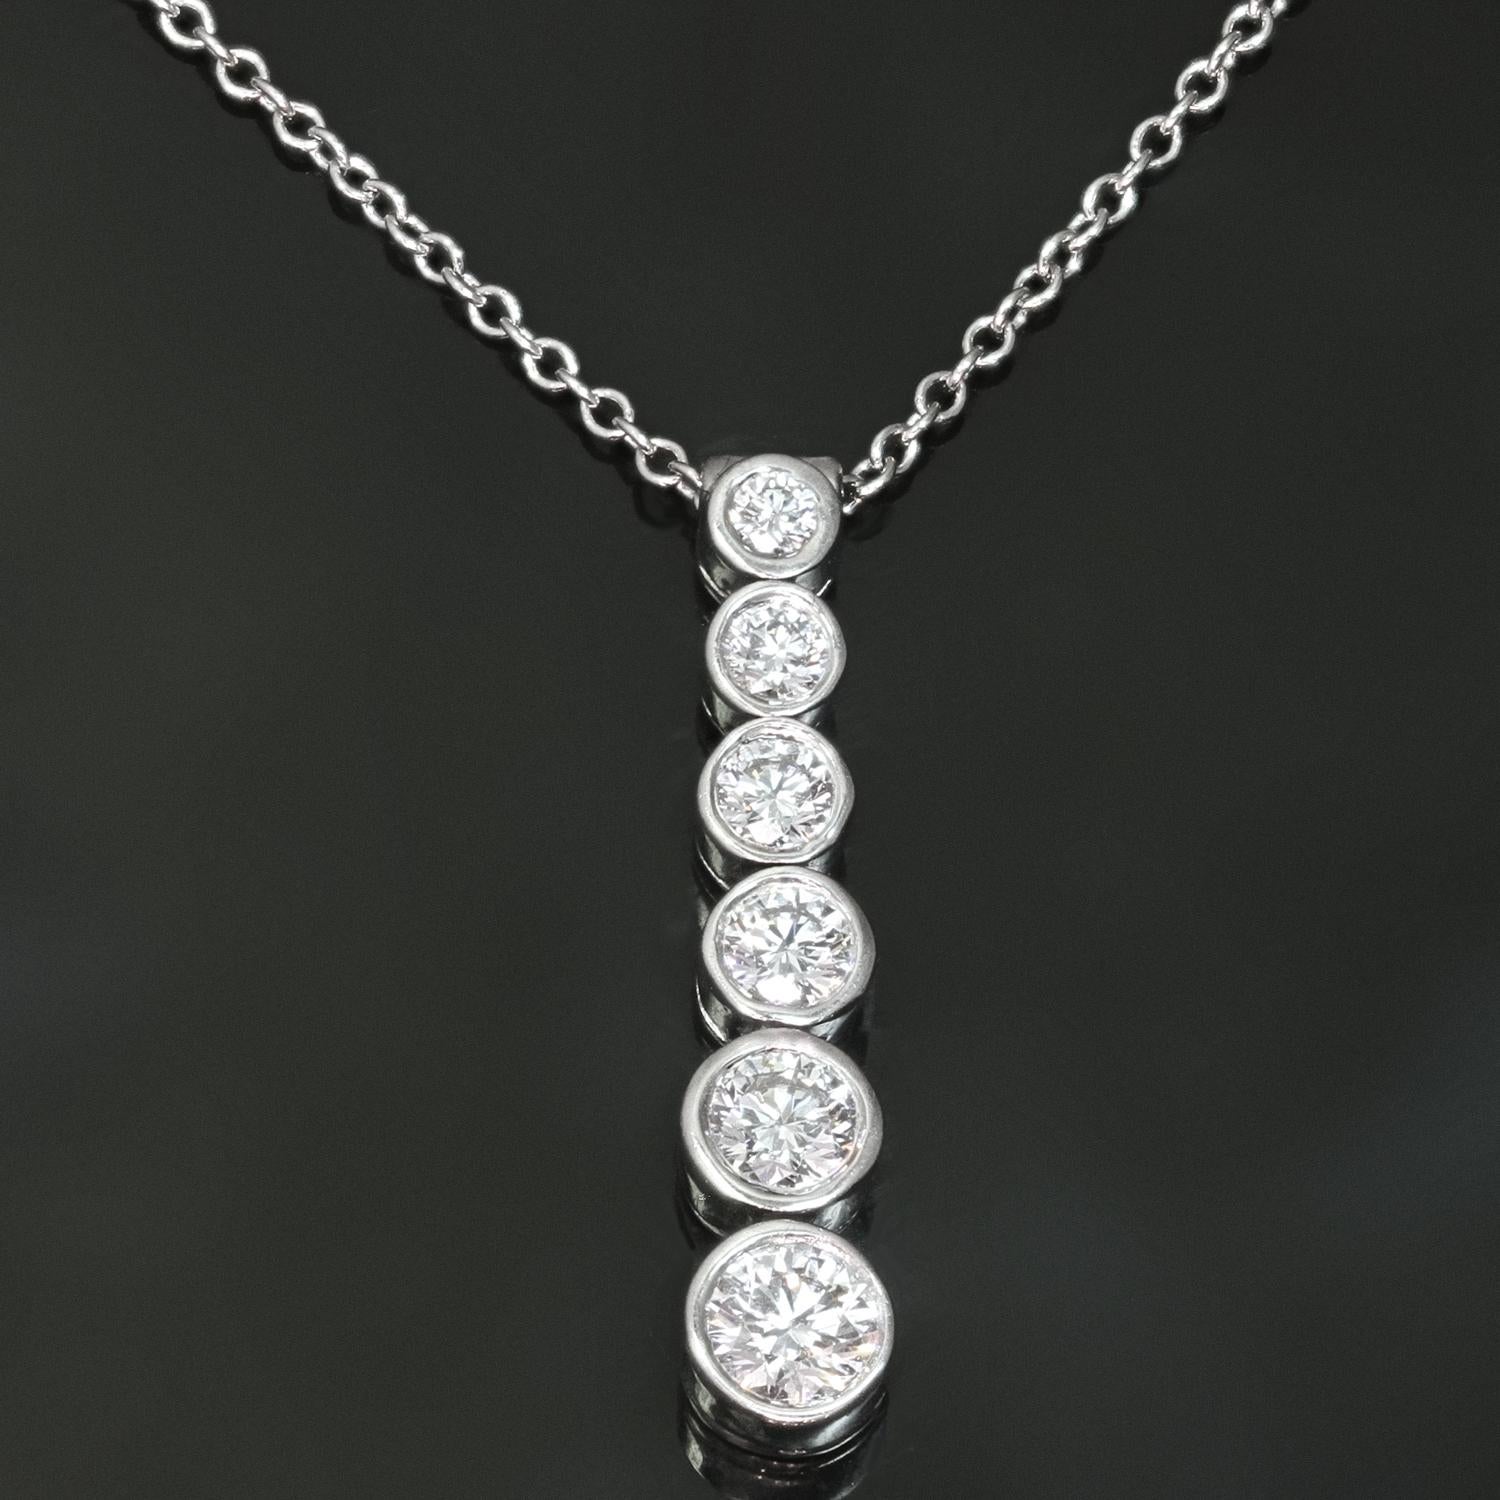 This gorgeous necklace from the chic Jazz collection is crafted in platinum and features a graduated drop pendant bezel-set with 6 round brilliant F-G VVS2-VS1 diamonds weighing an estimated 0.45 carats. Made in United States circa 2010s.